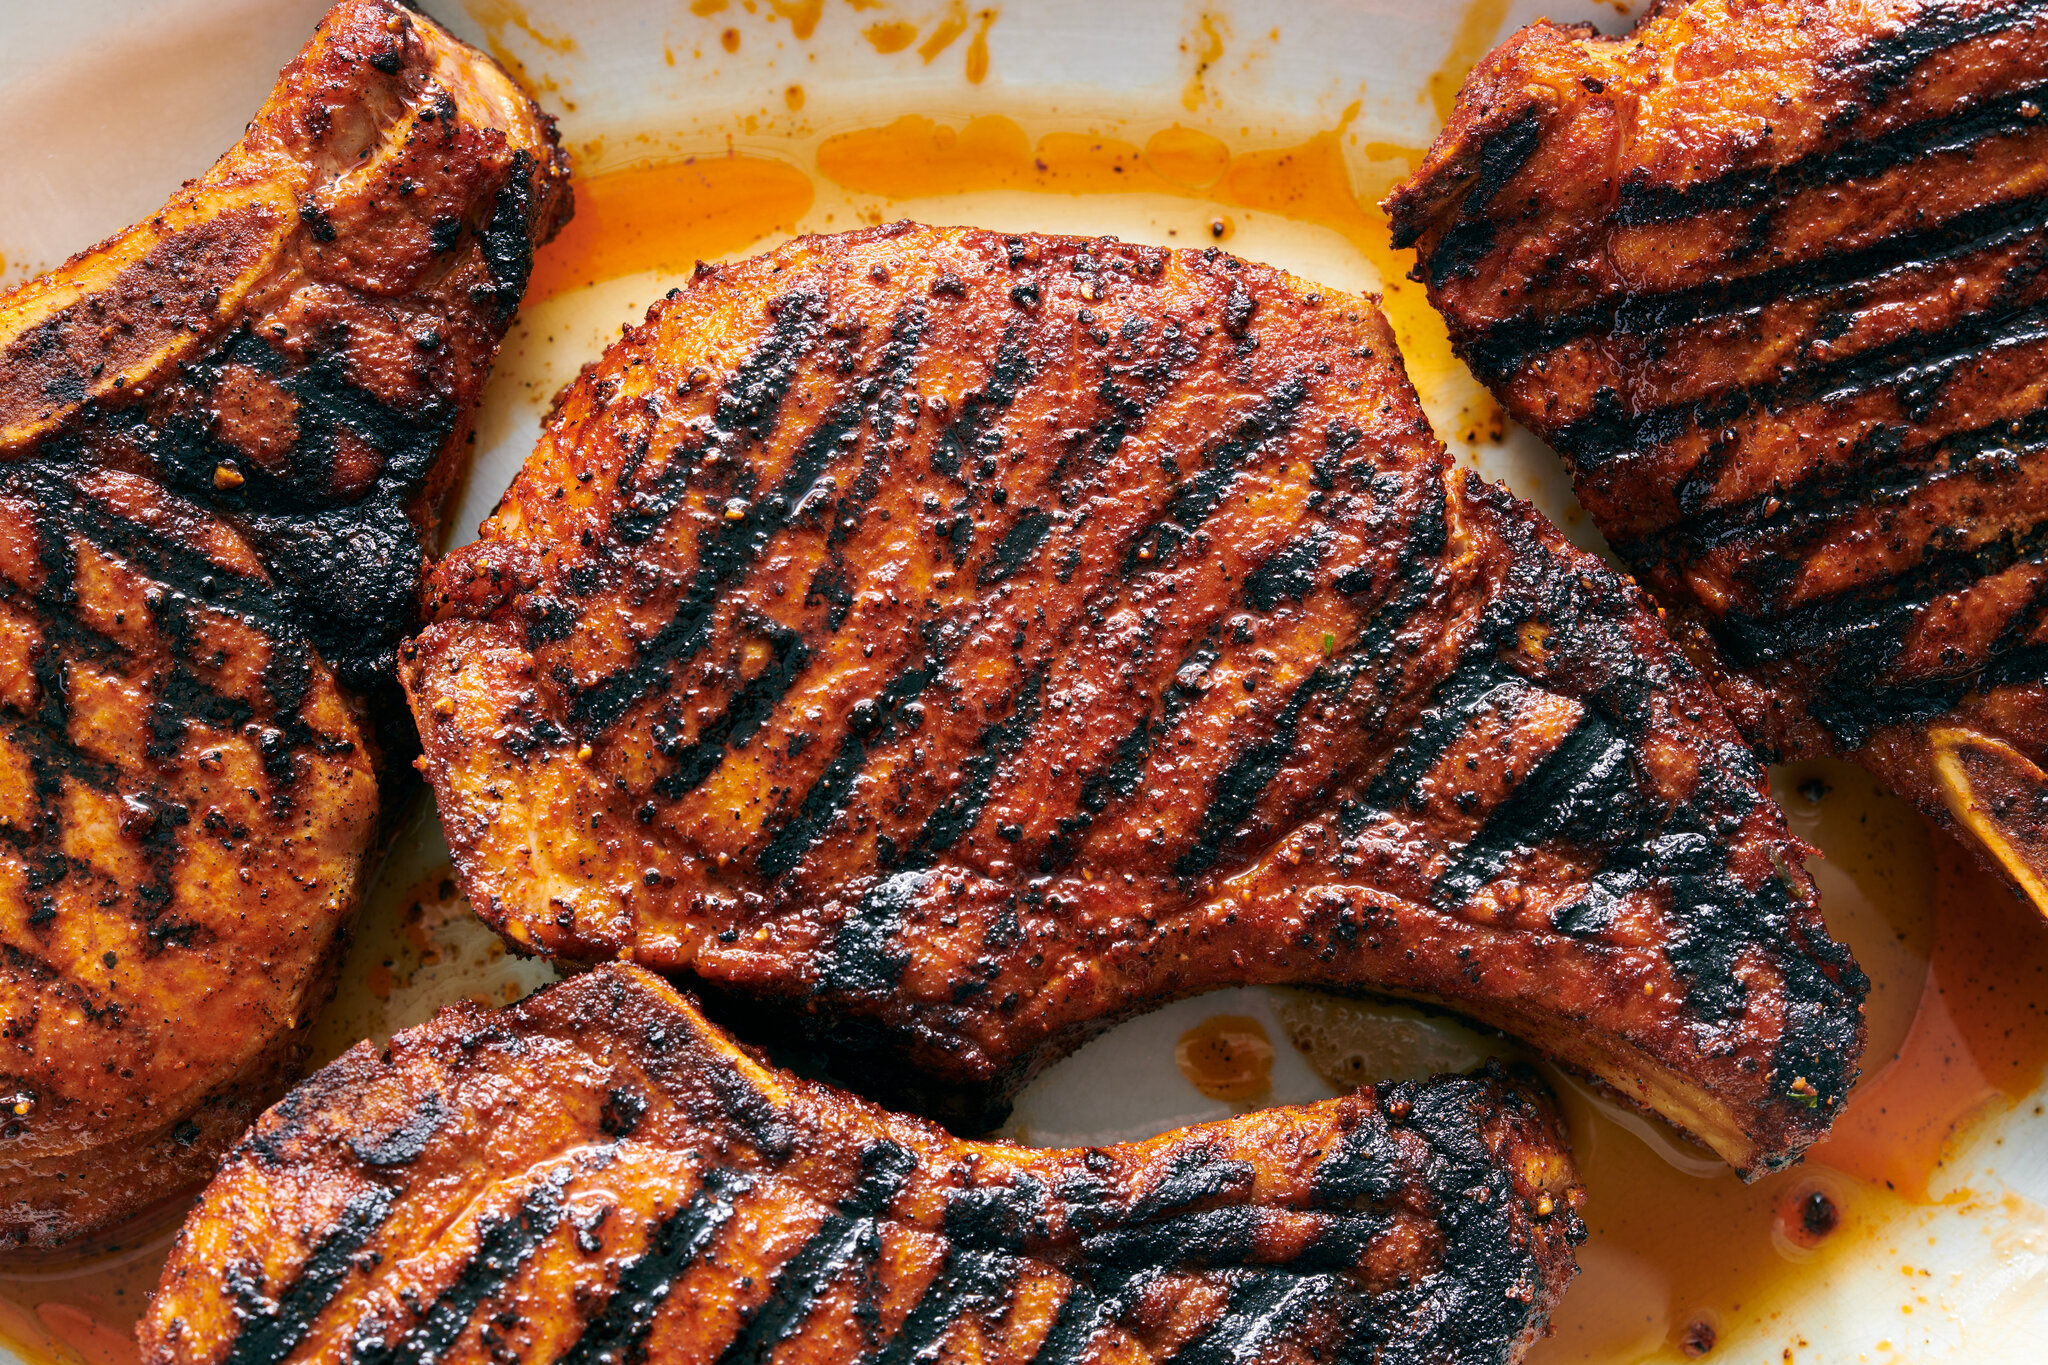 Best Grilled Pork Chops Recipe - How to Grill Pork Chops - The Tech ...